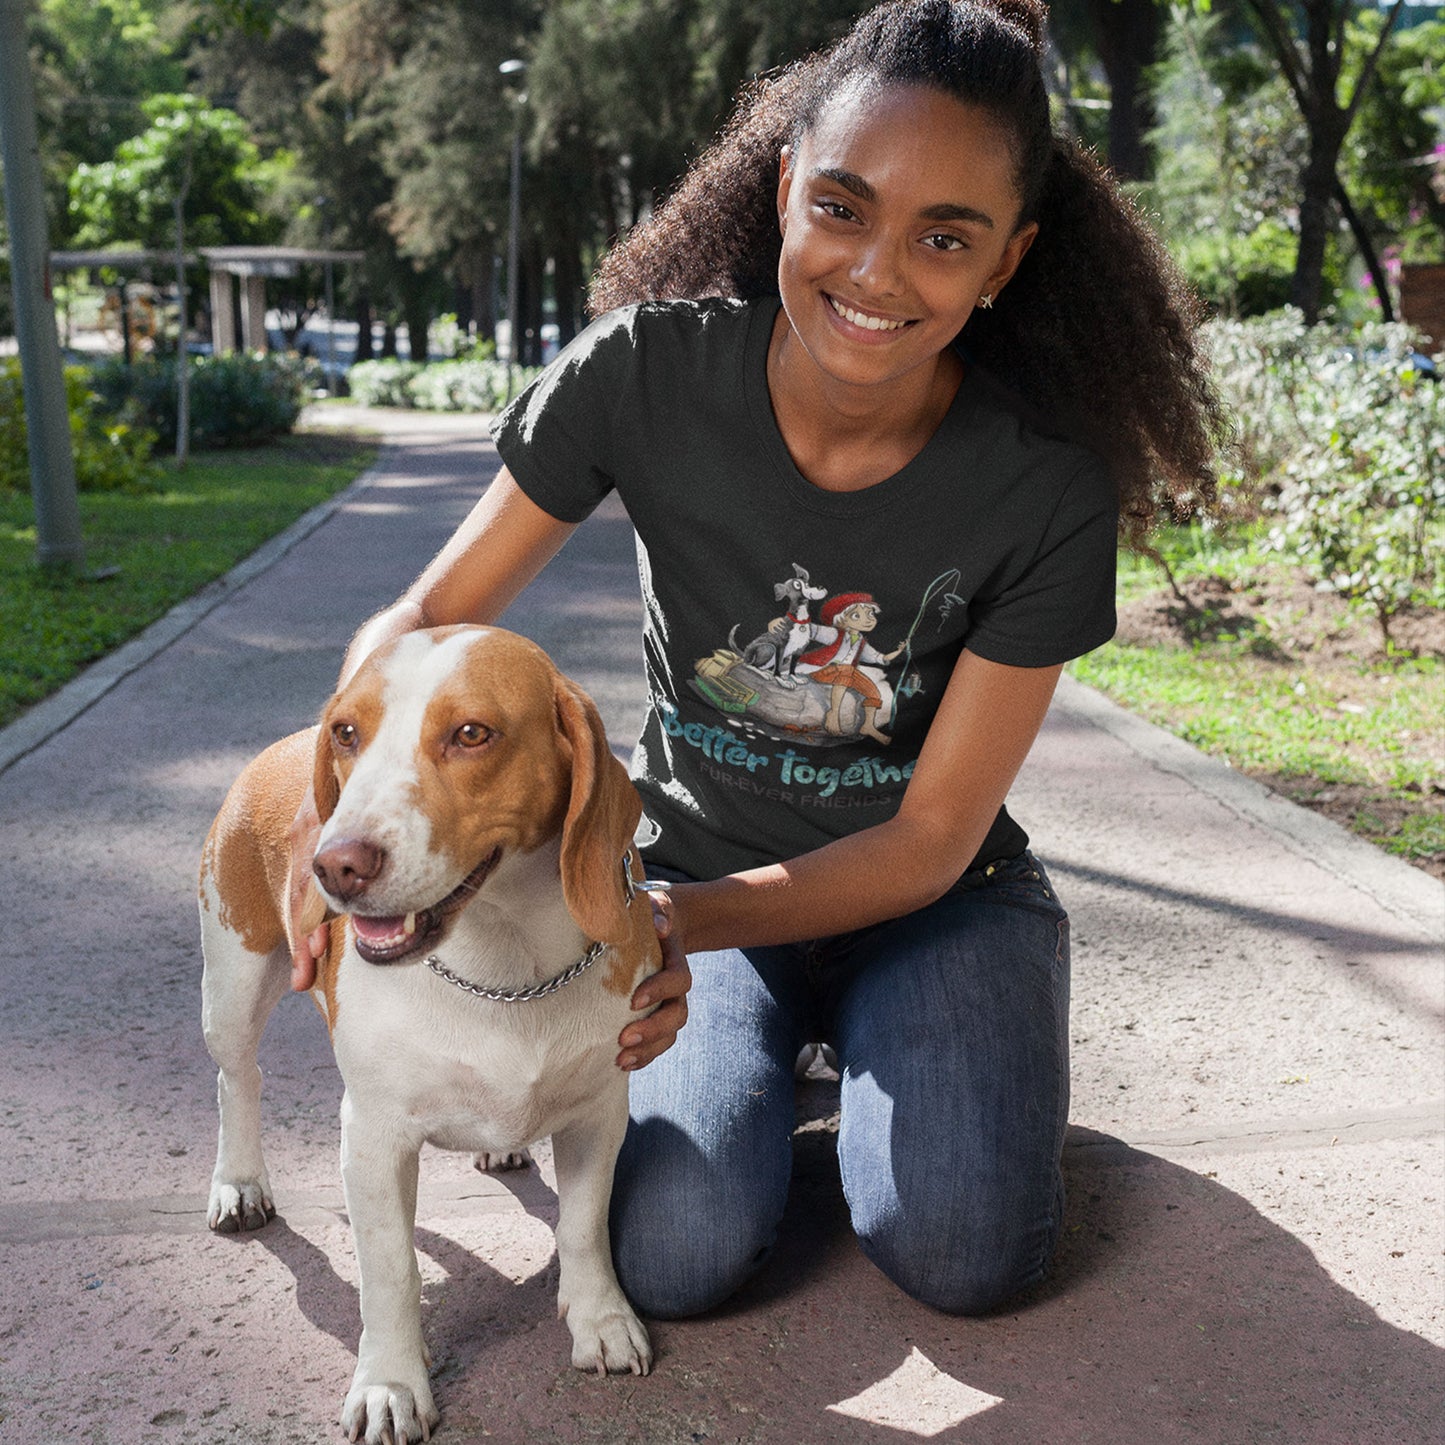 A young woman with curly hair wearing a 'Dogs Pure Love Better Together' unisex tee, kneels on a park footpath holding her Beagle dog. 